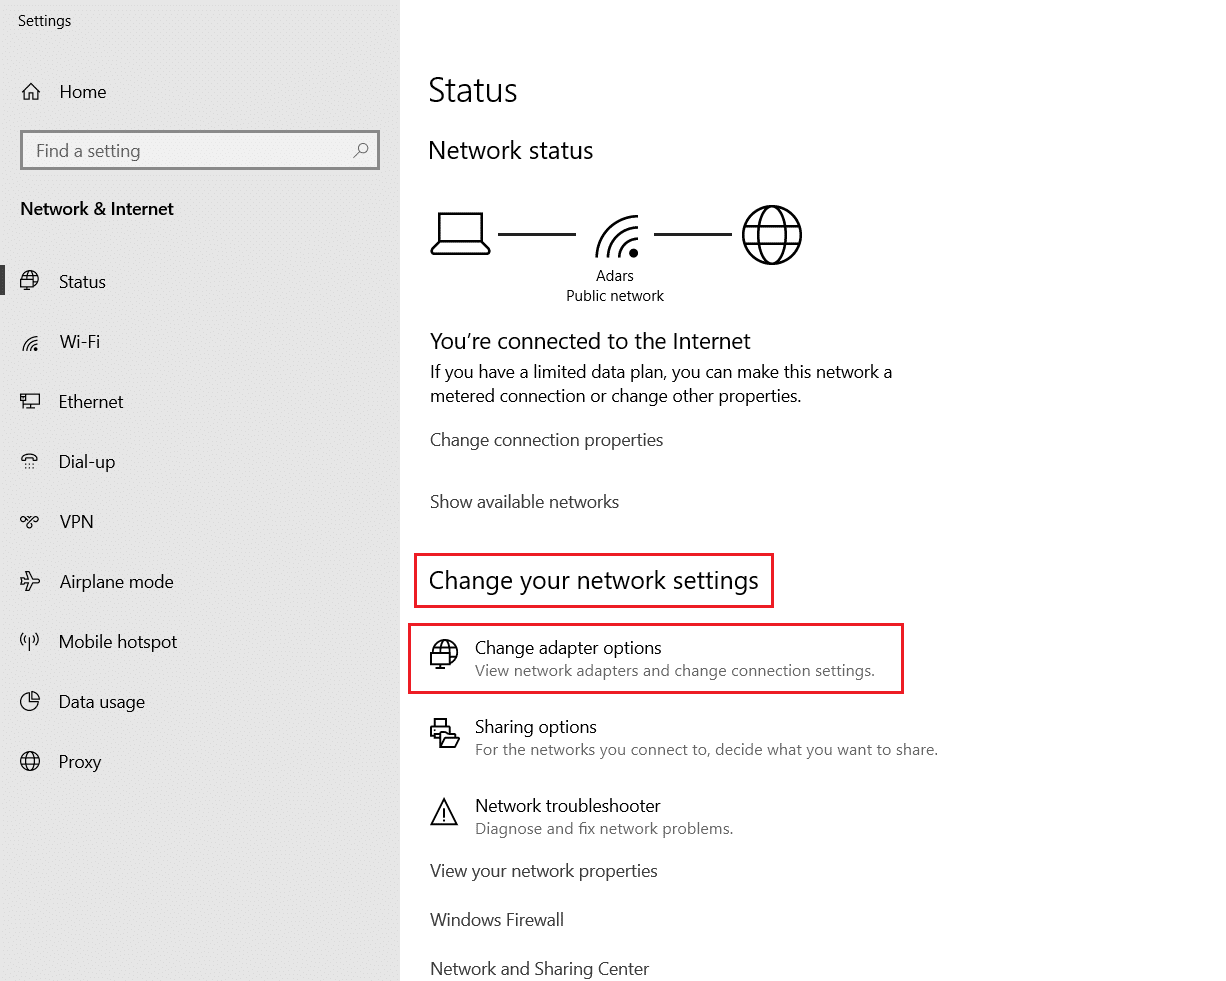 click on Change adapter option